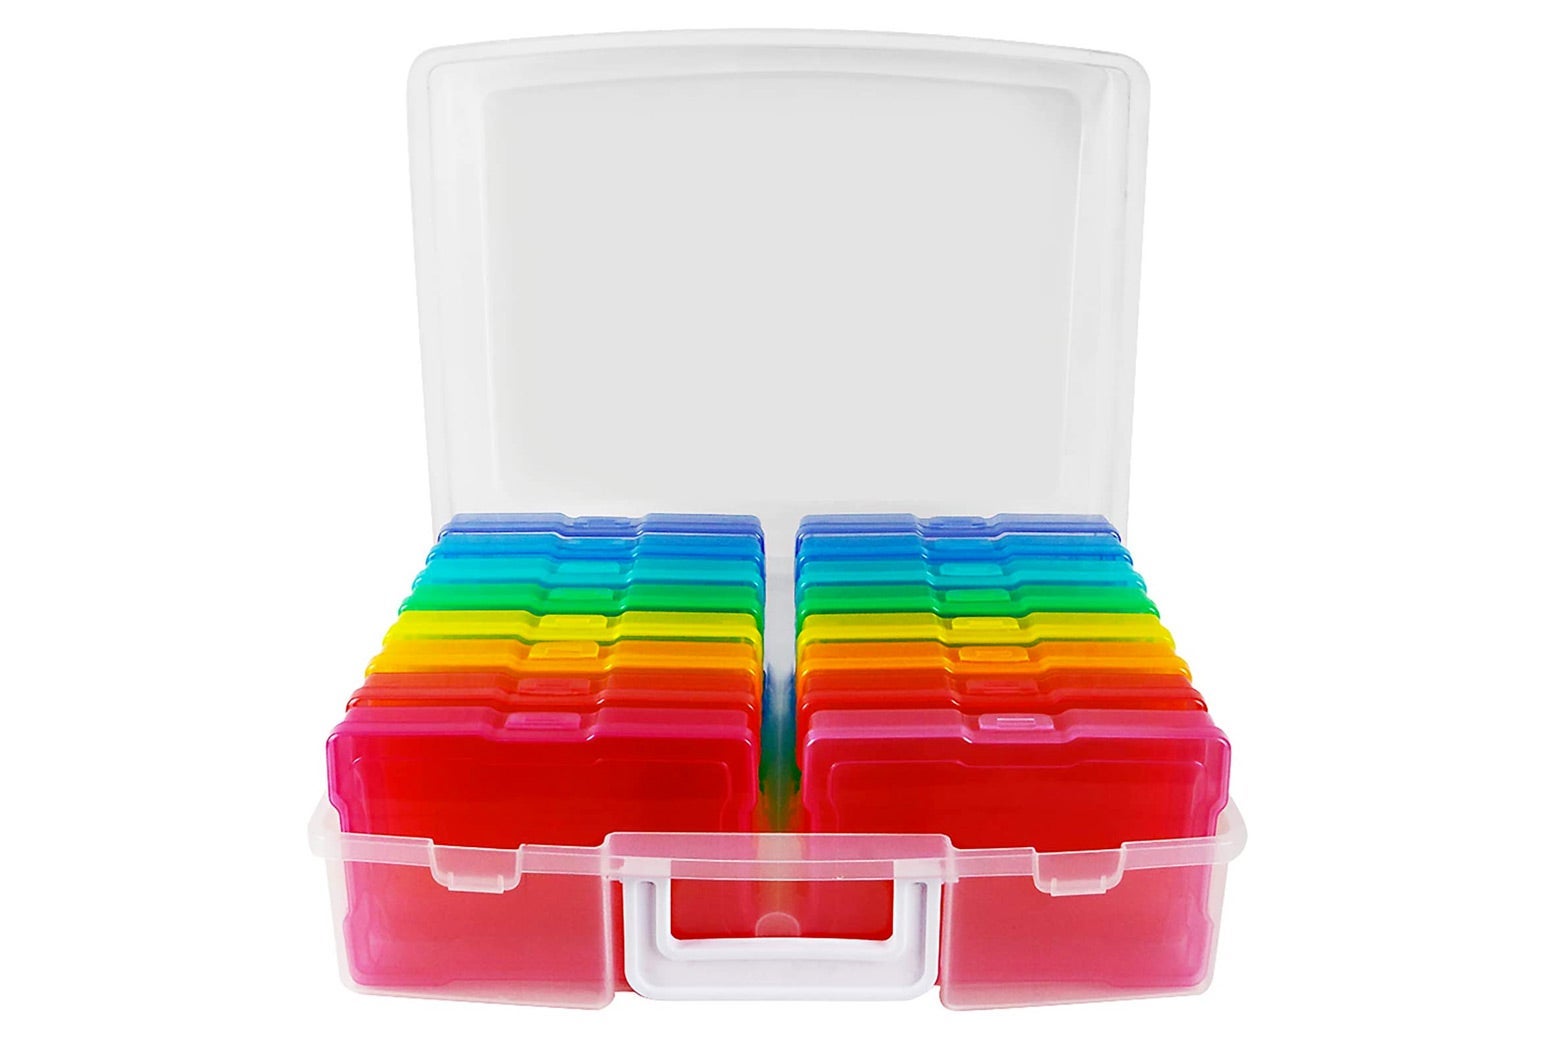 Clear plastic box containing 16 brightly colored photo cases